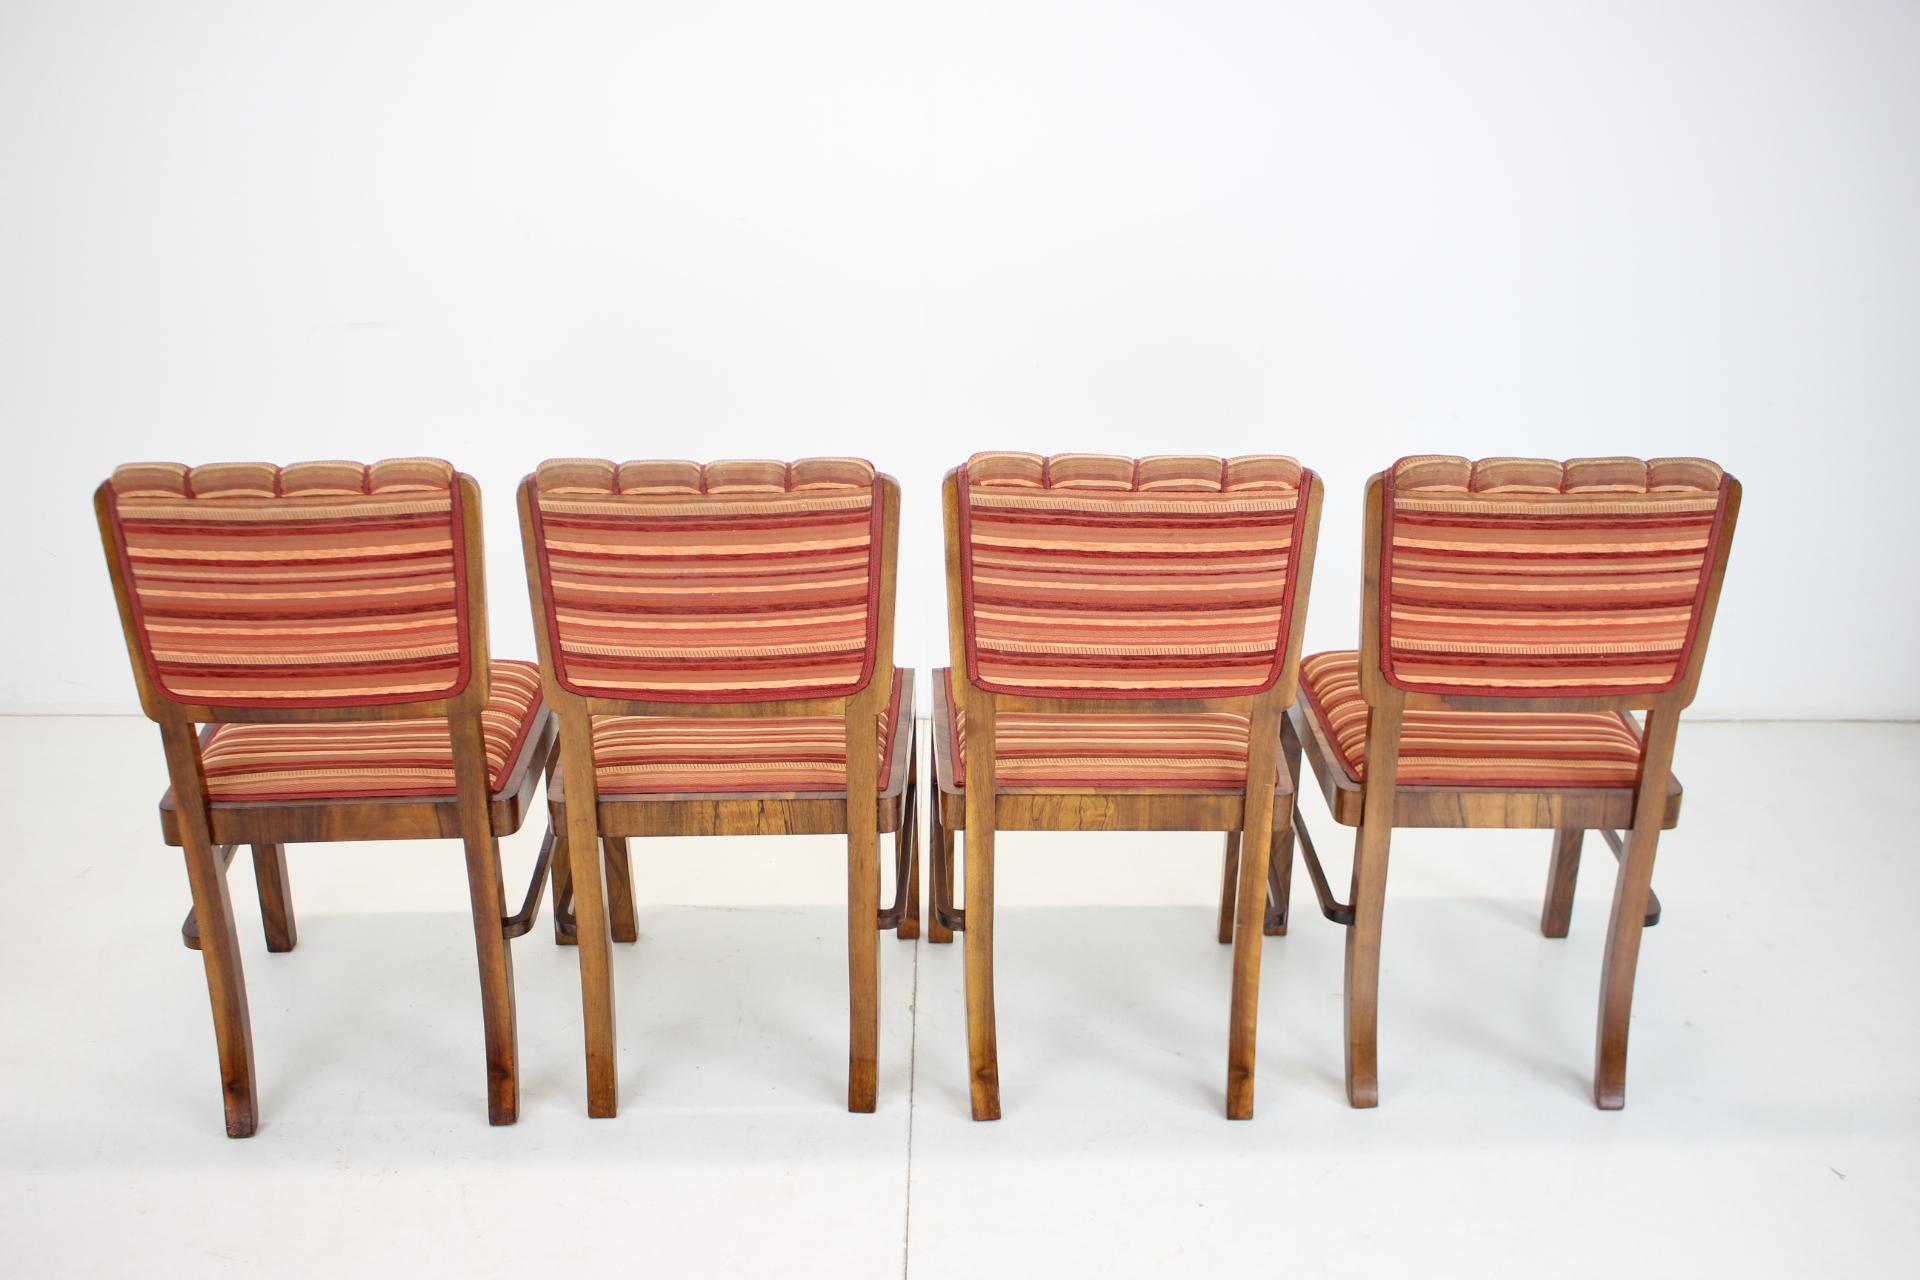 1930s Set of 4 Art Deco Dining Chairs, Czechoslovakia For Sale 11